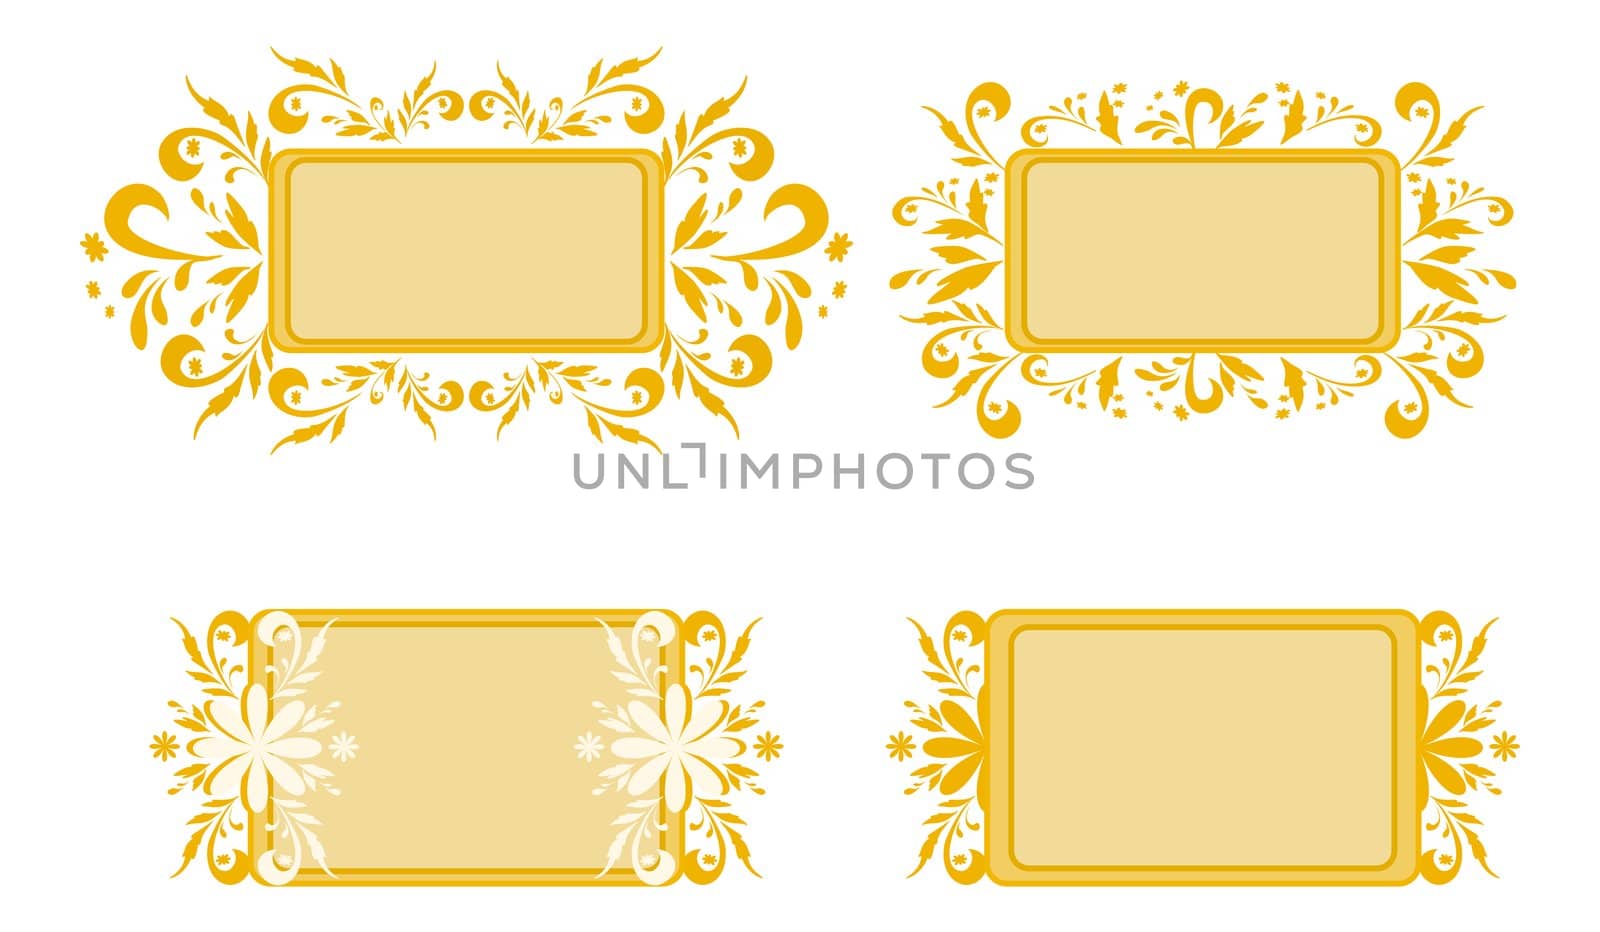 Backgrounds with floral pattern by alexcoolok